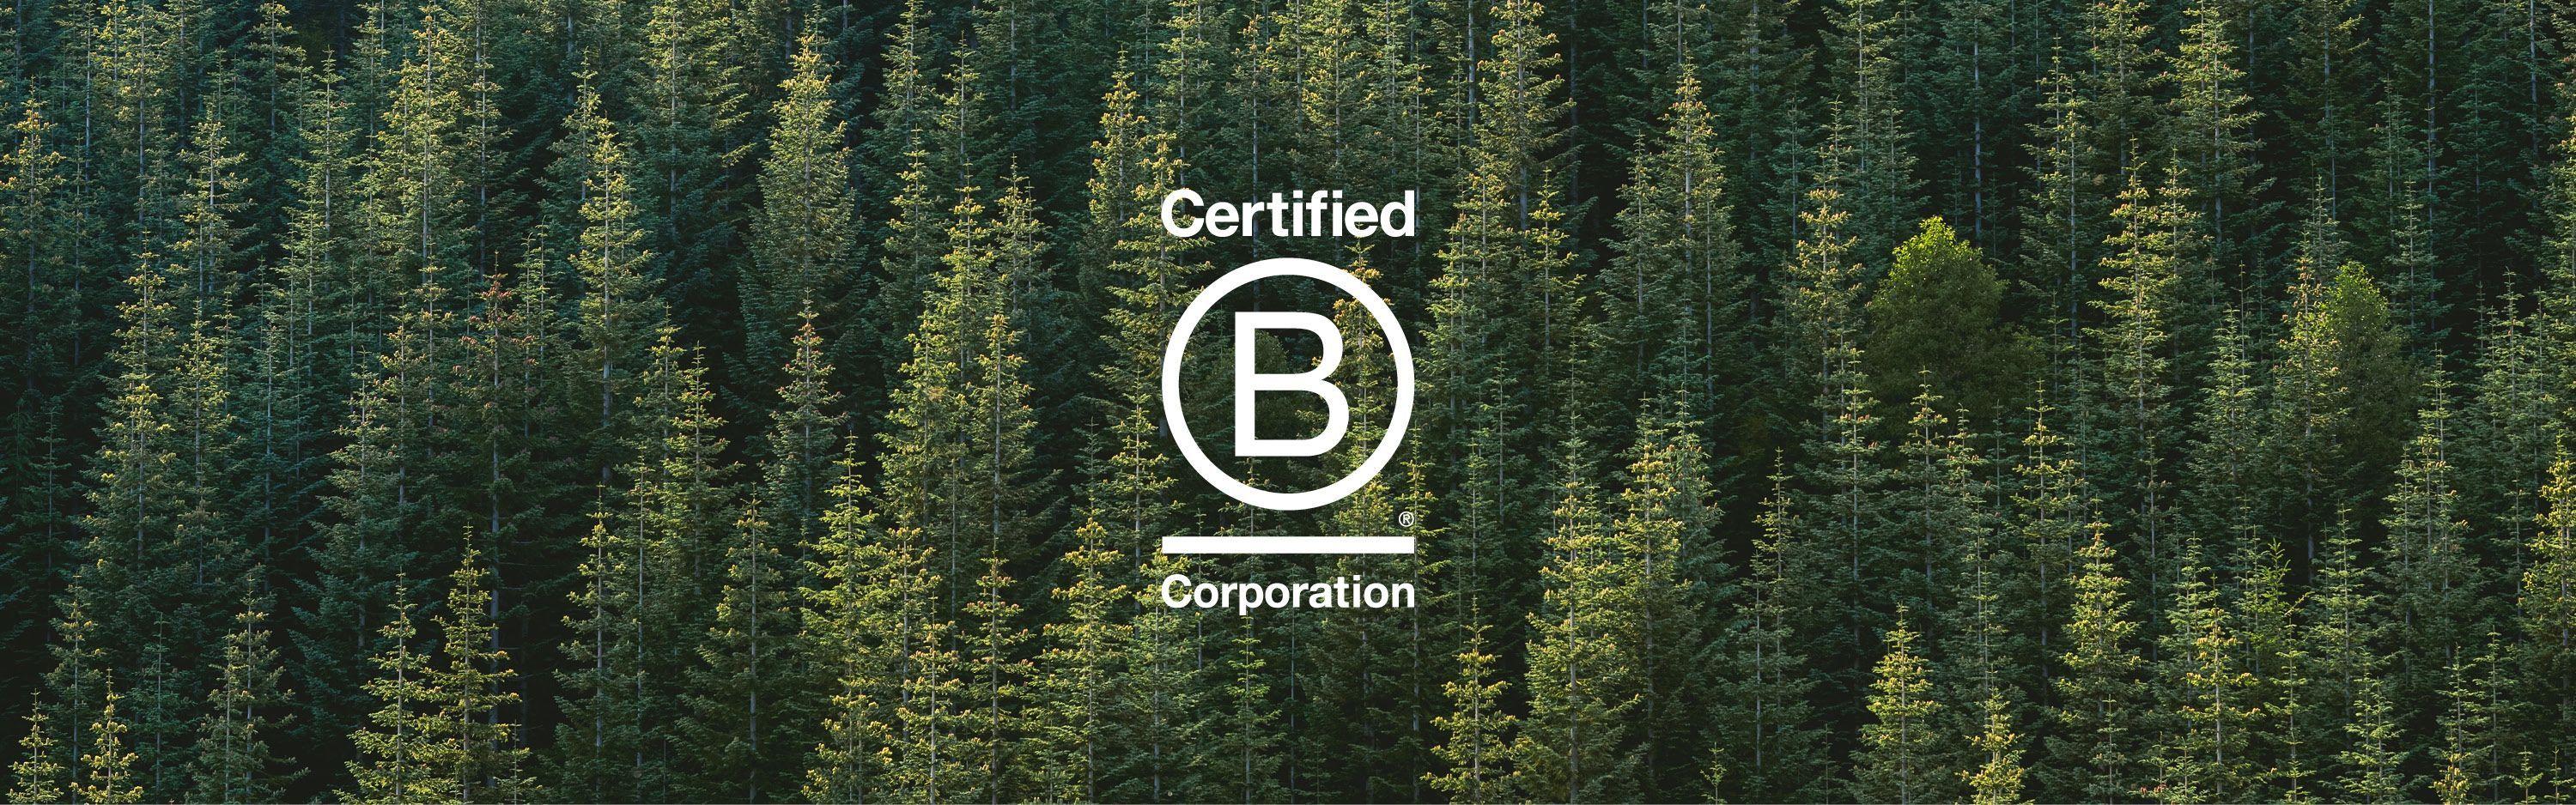 A picture of a forest with the logo of Bcorp